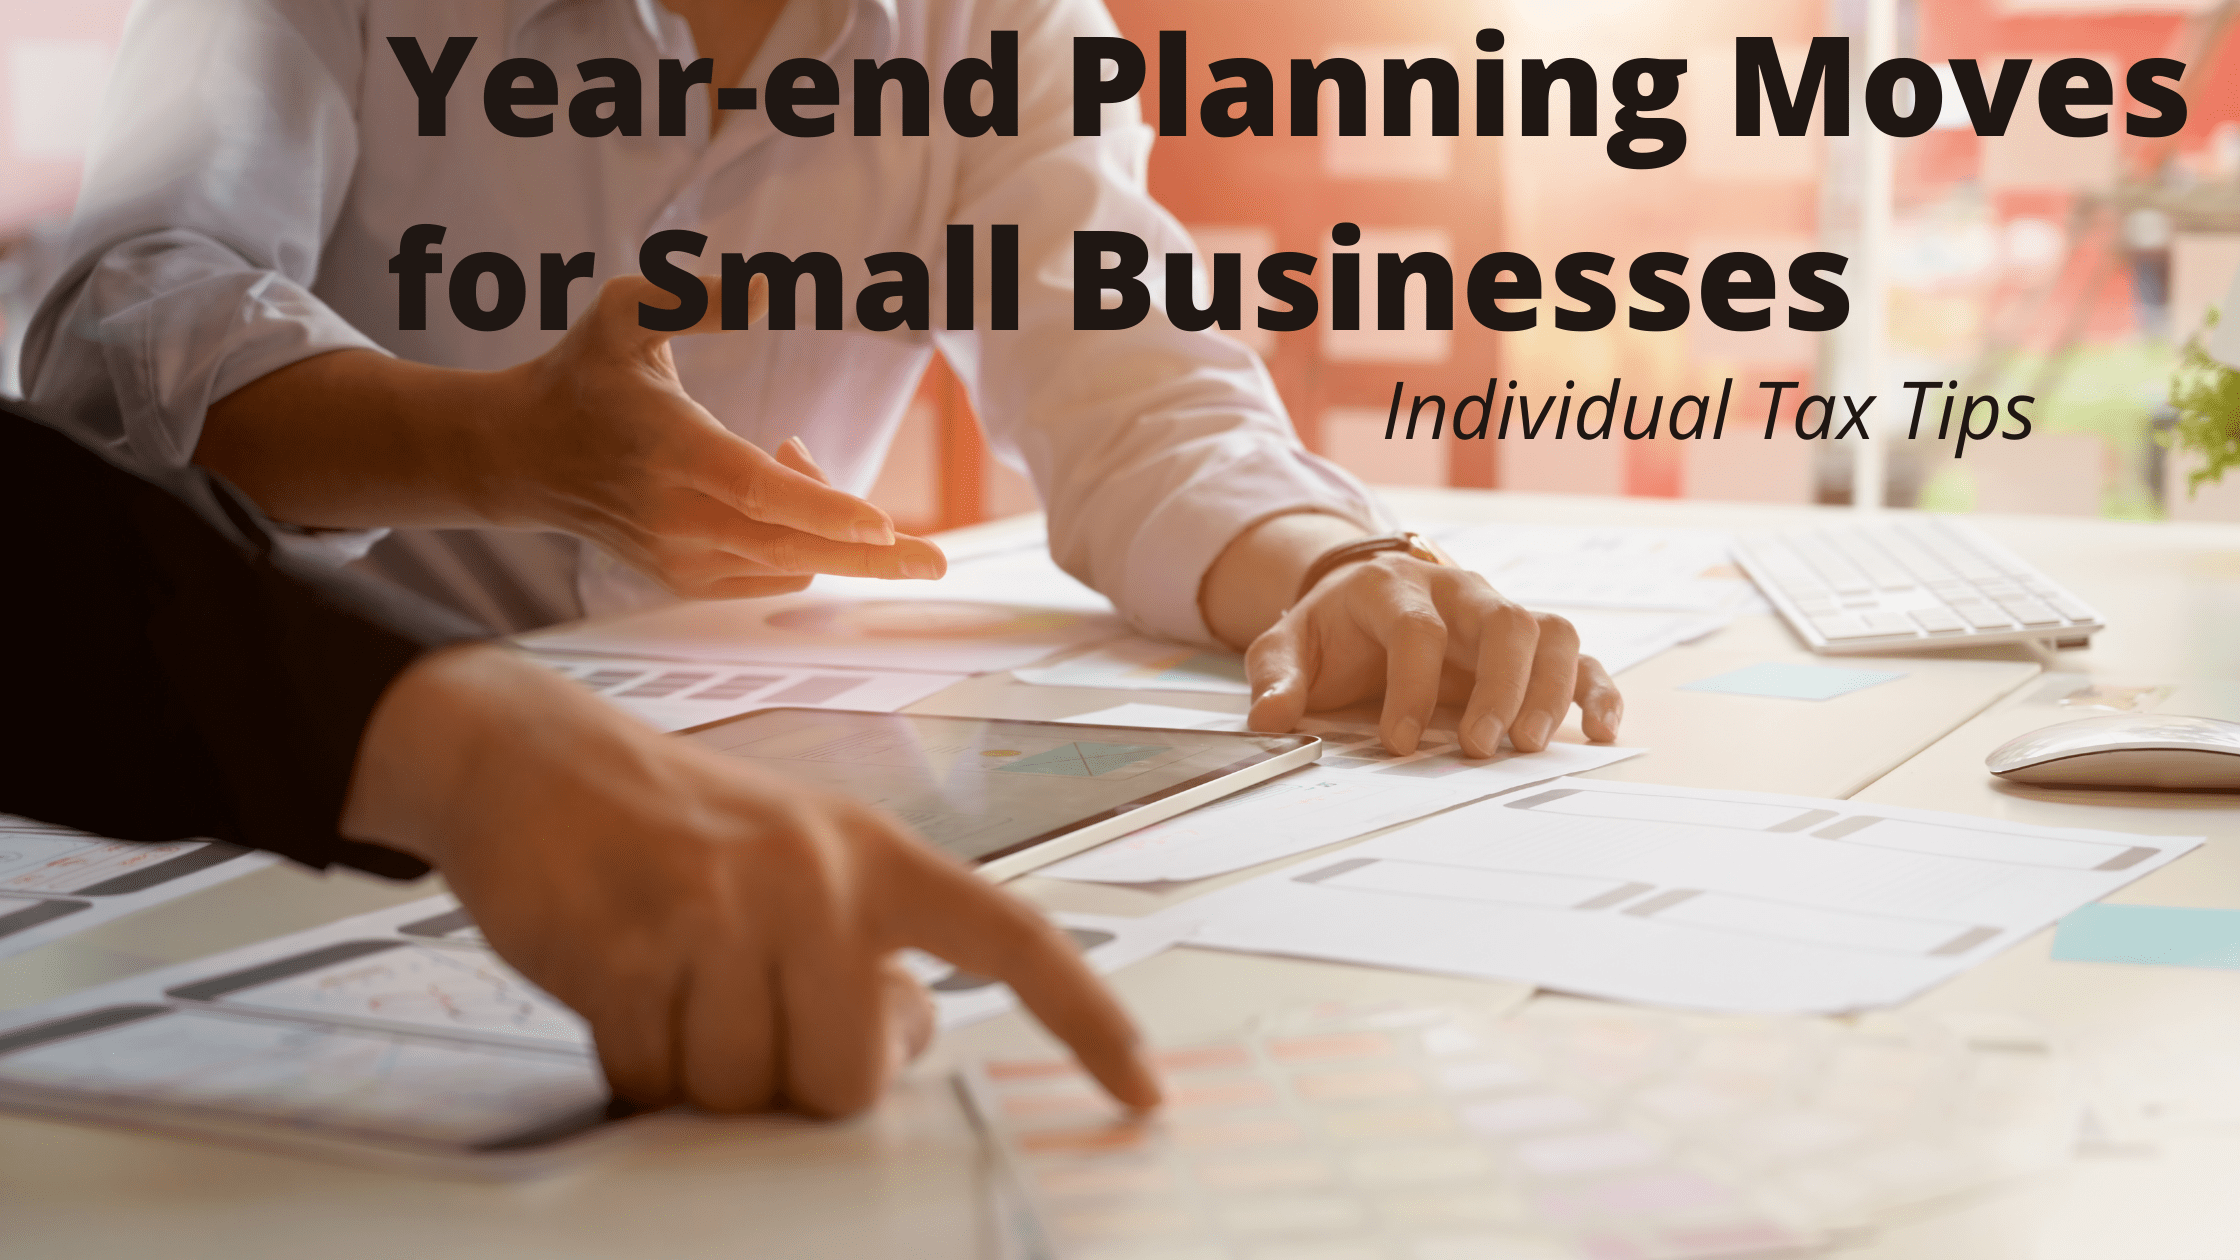 Small Business planning tips for you!